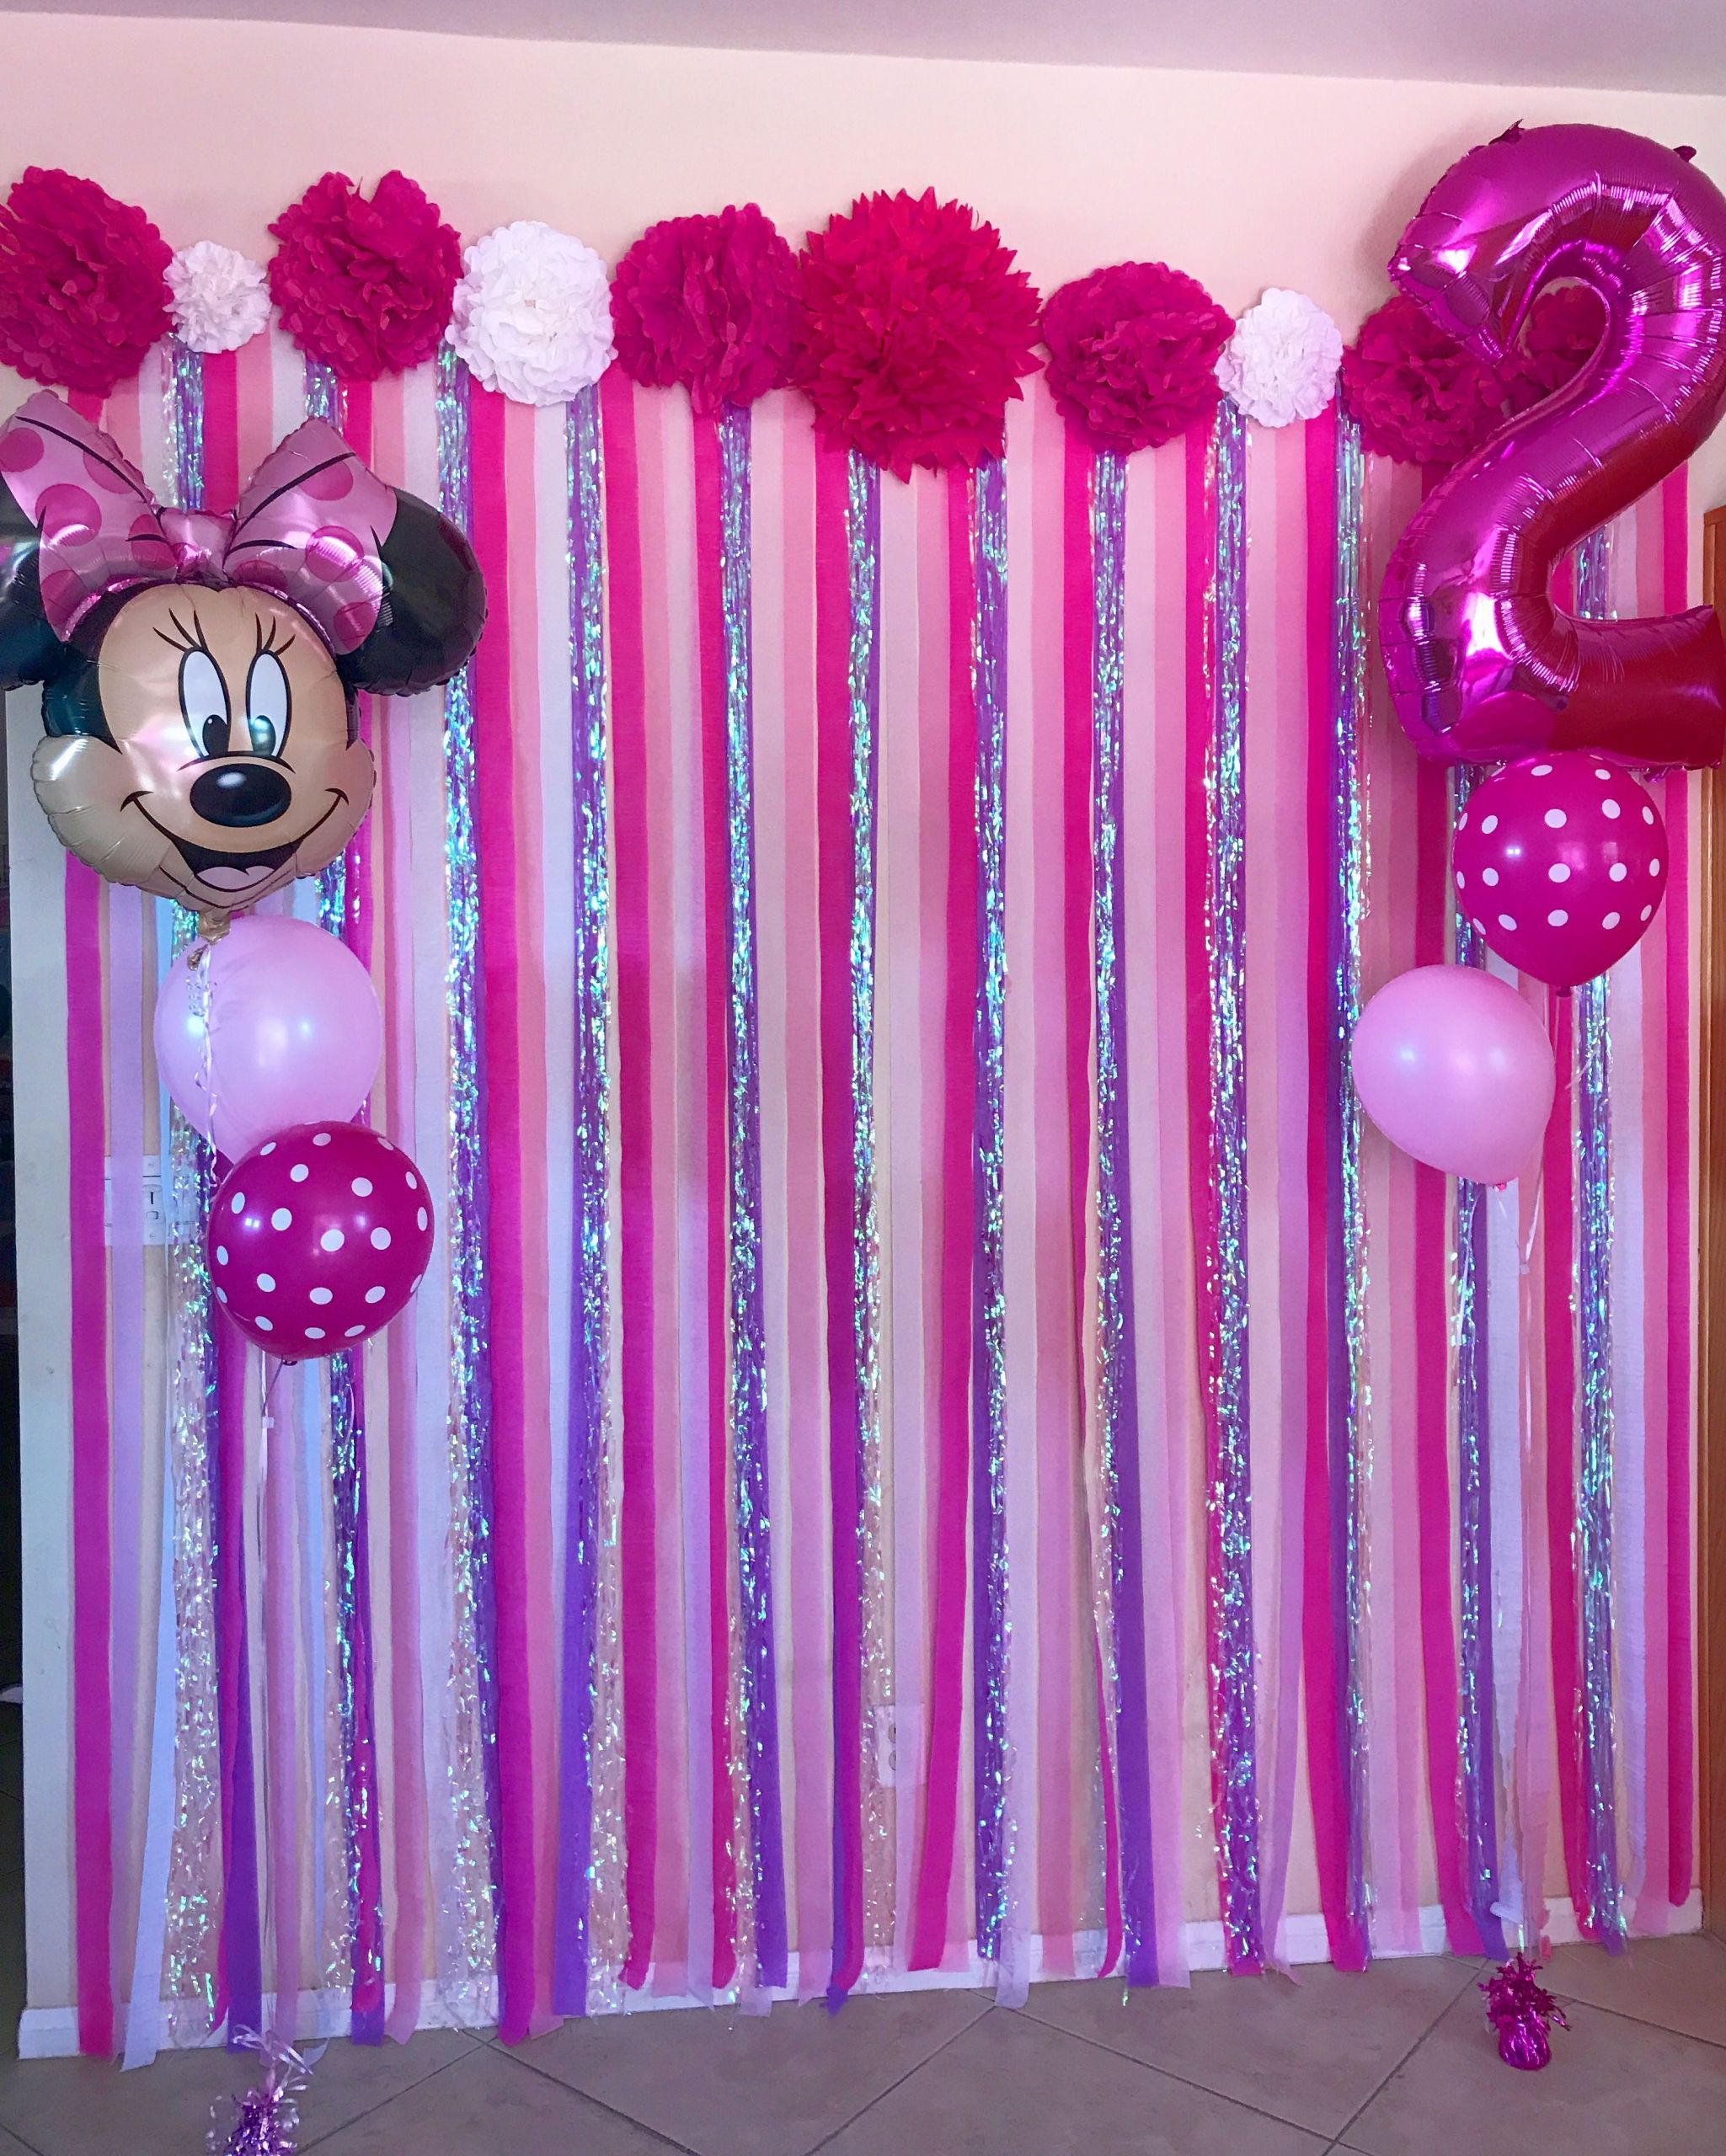 DIY Minnie Mouse Party Decorations
 DIY Minnie Mouse themed photo streamer wall